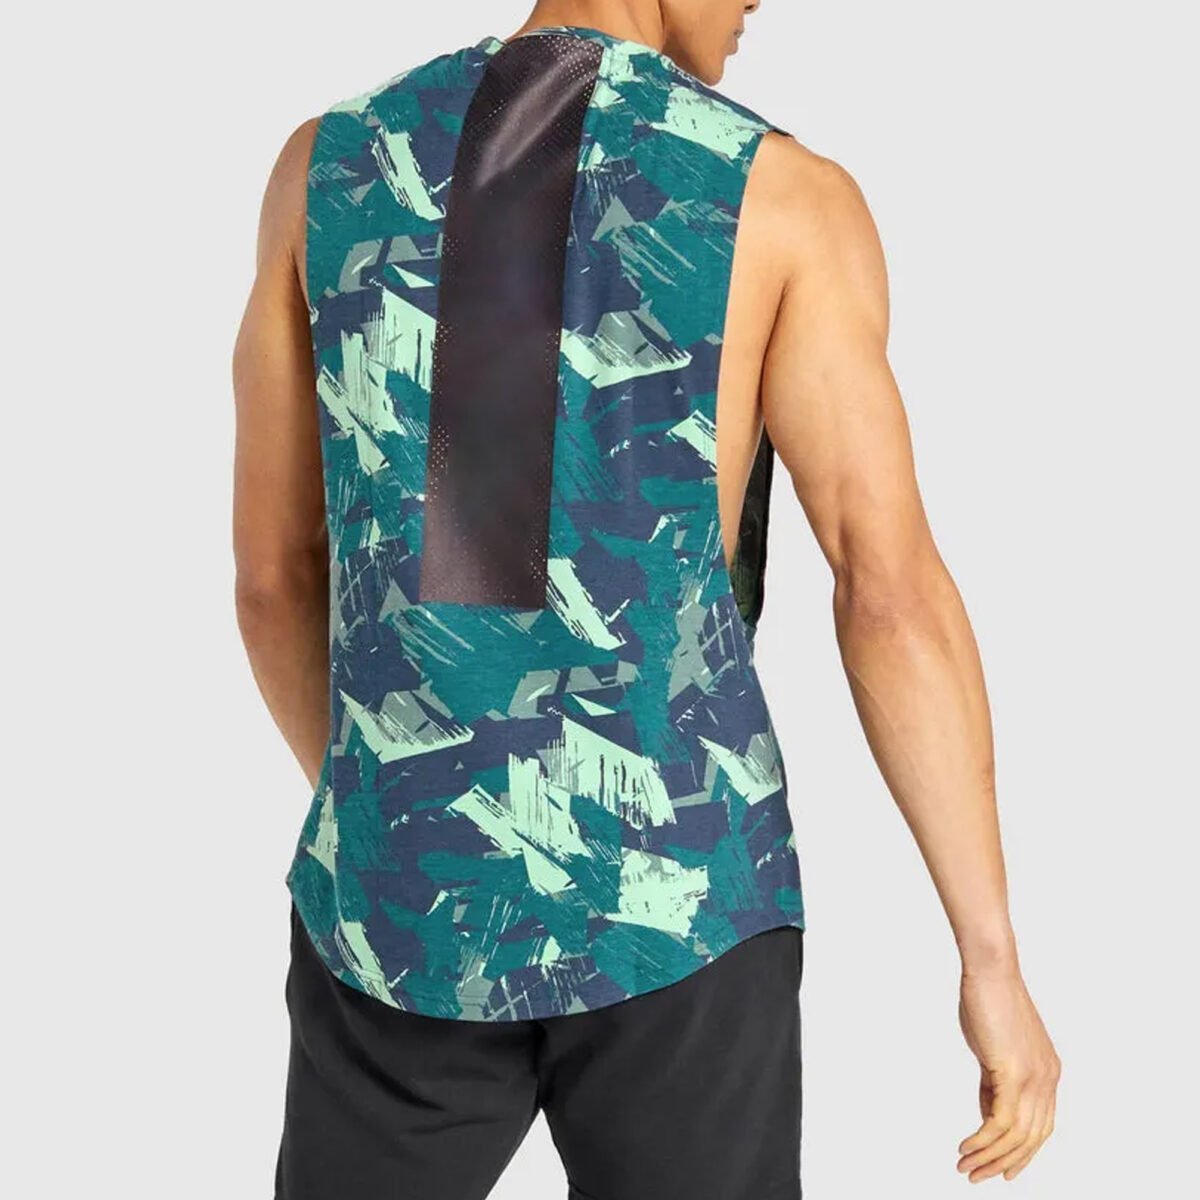 Fully sublimated tank tops